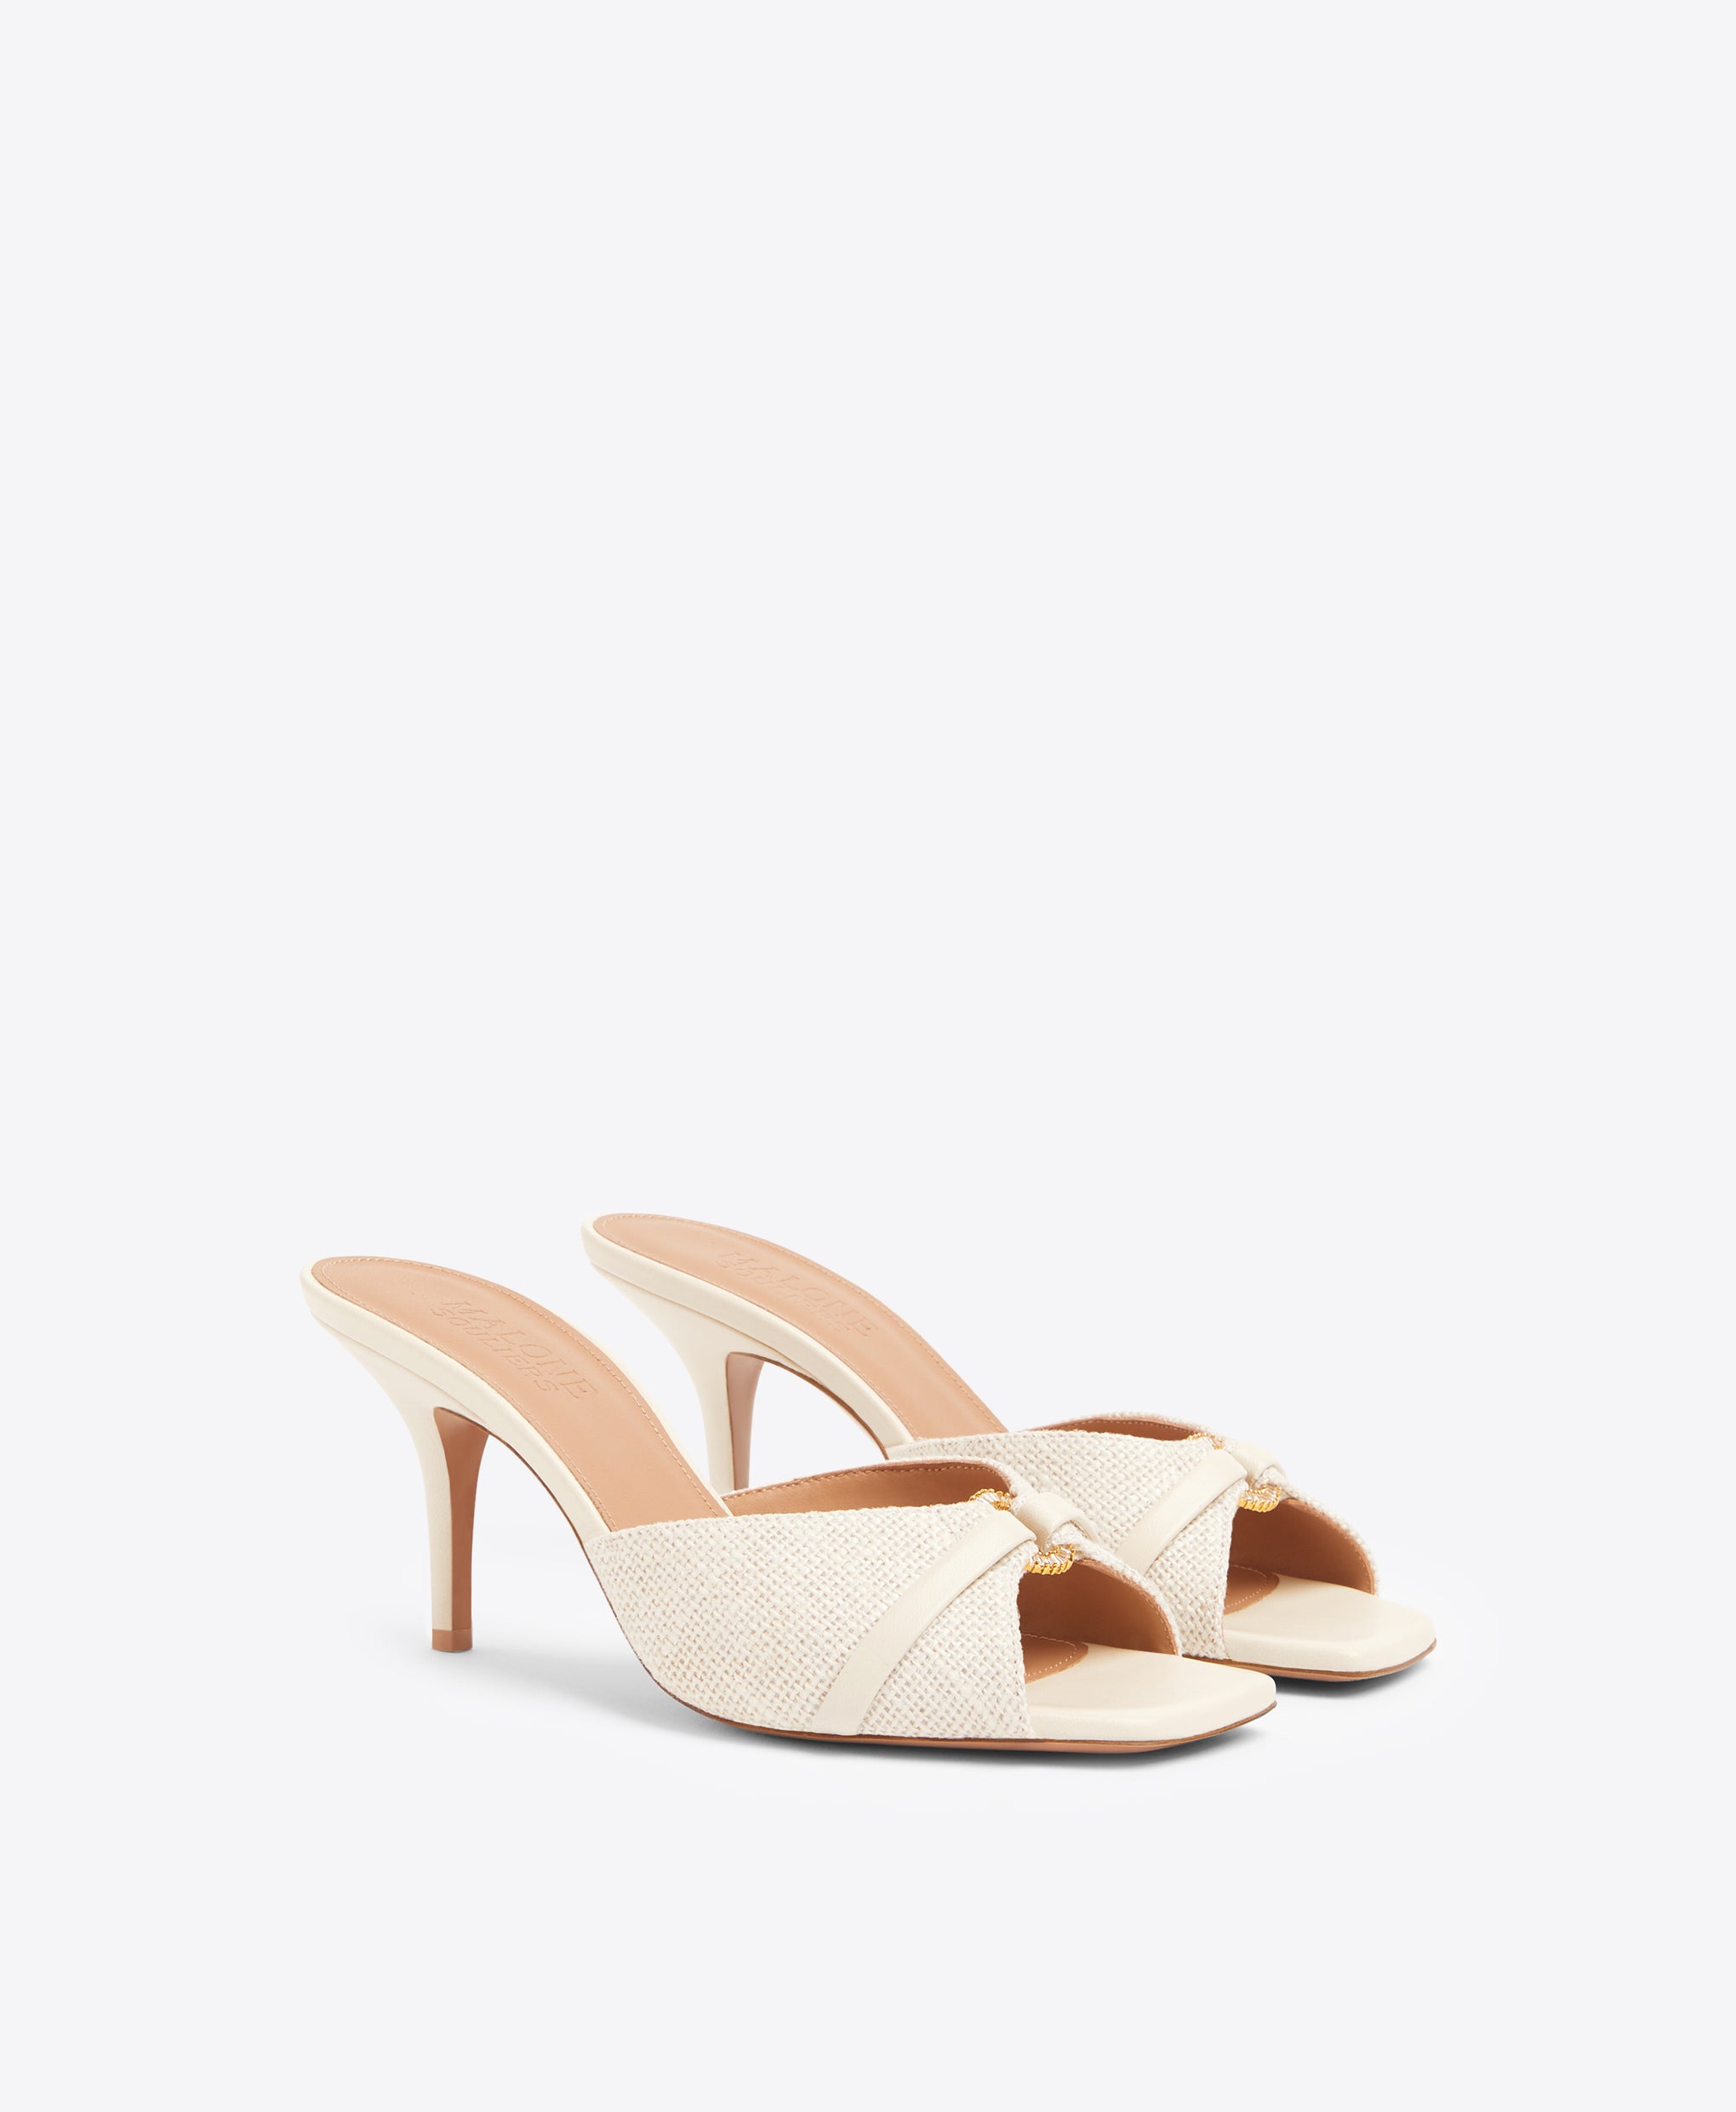 Patricia 70 Cream Jute Heeled Sandals Malone Souliers